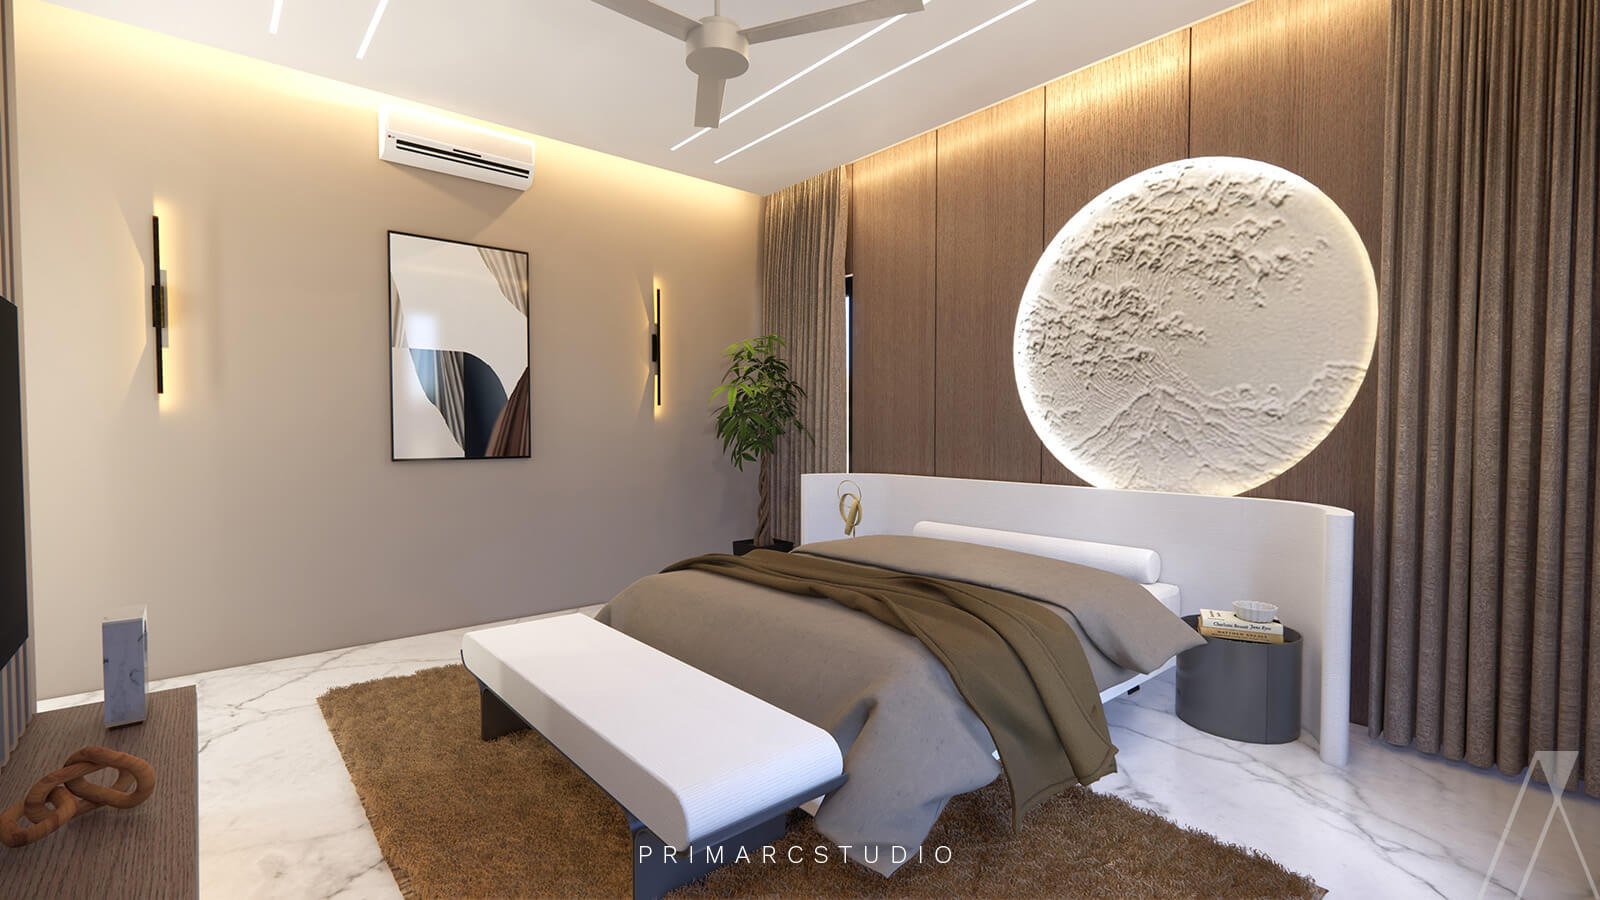 interior design inspired by japandi interior design and sleek wall lights to provide ambient lighting